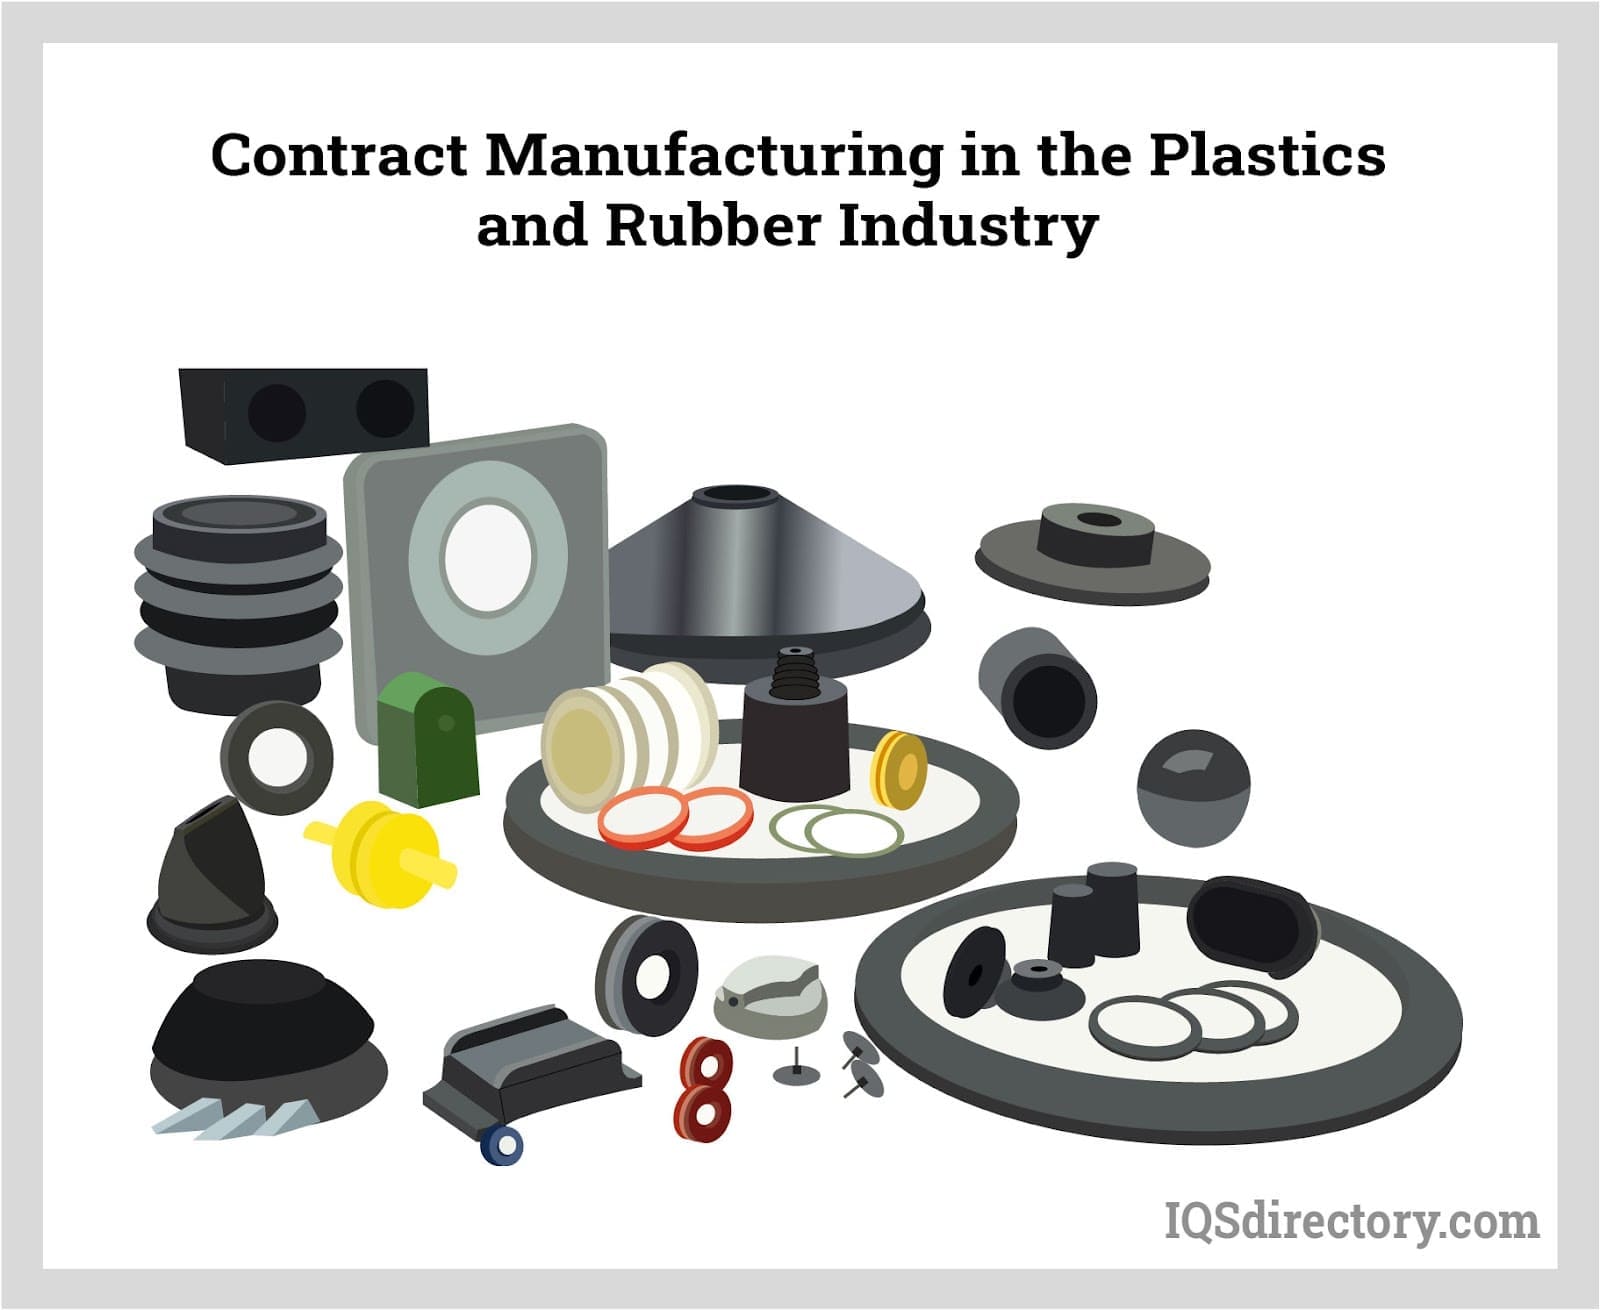 Contract Manufacturing in the Plastics and Rubber Industry